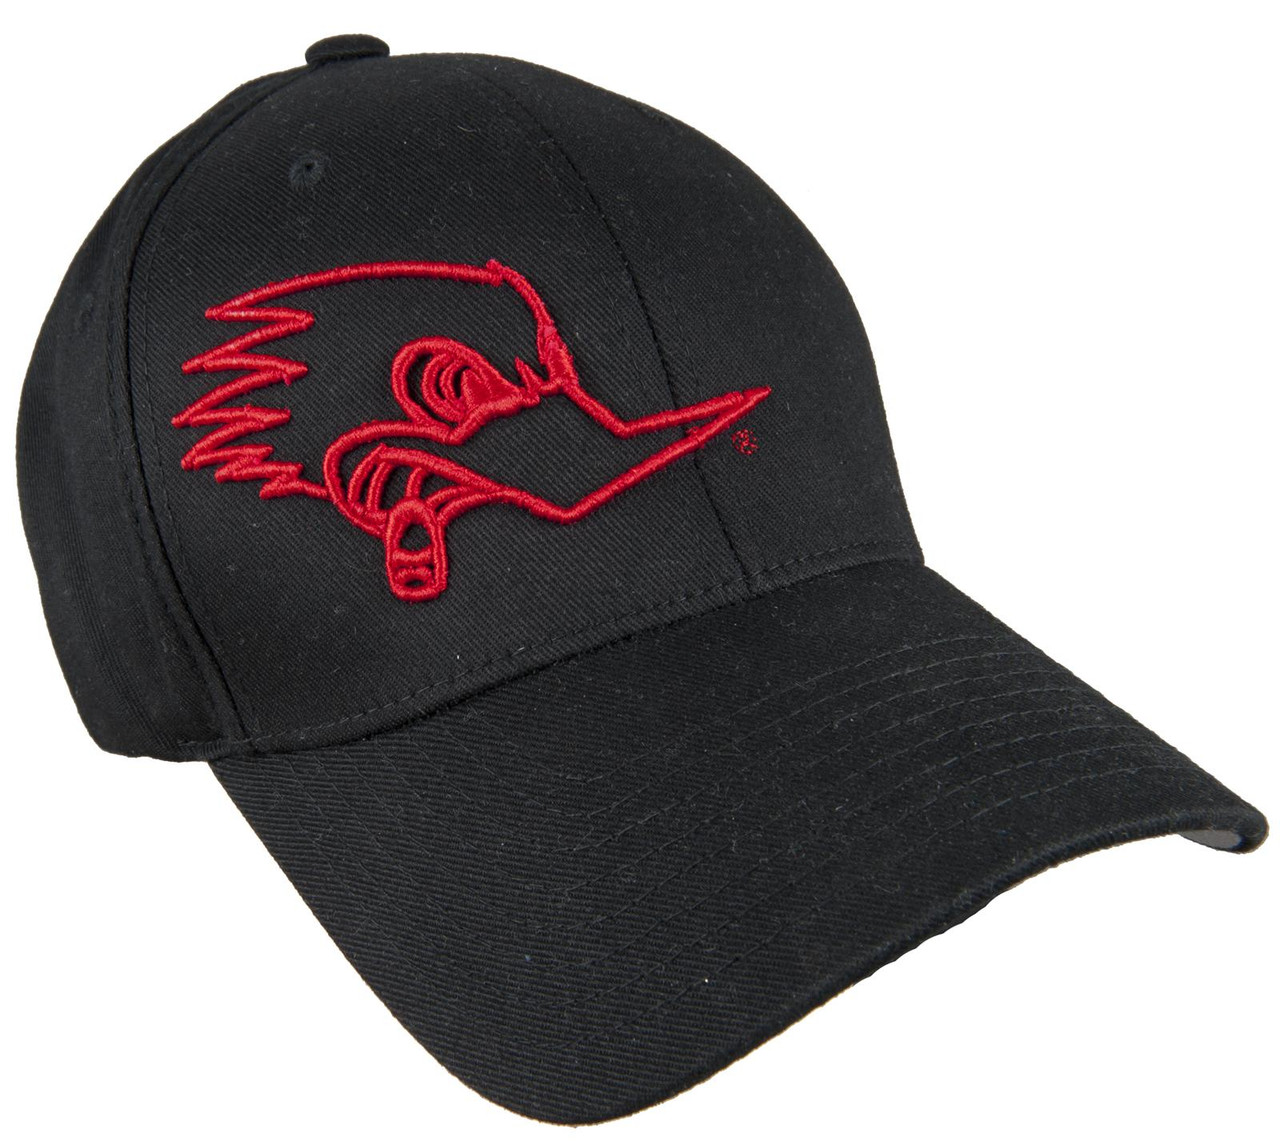 Clay Smith Cams Mr. Horsepower Hat Outline - Parts - Black Arizona of Vintage S/M FlexFit Red